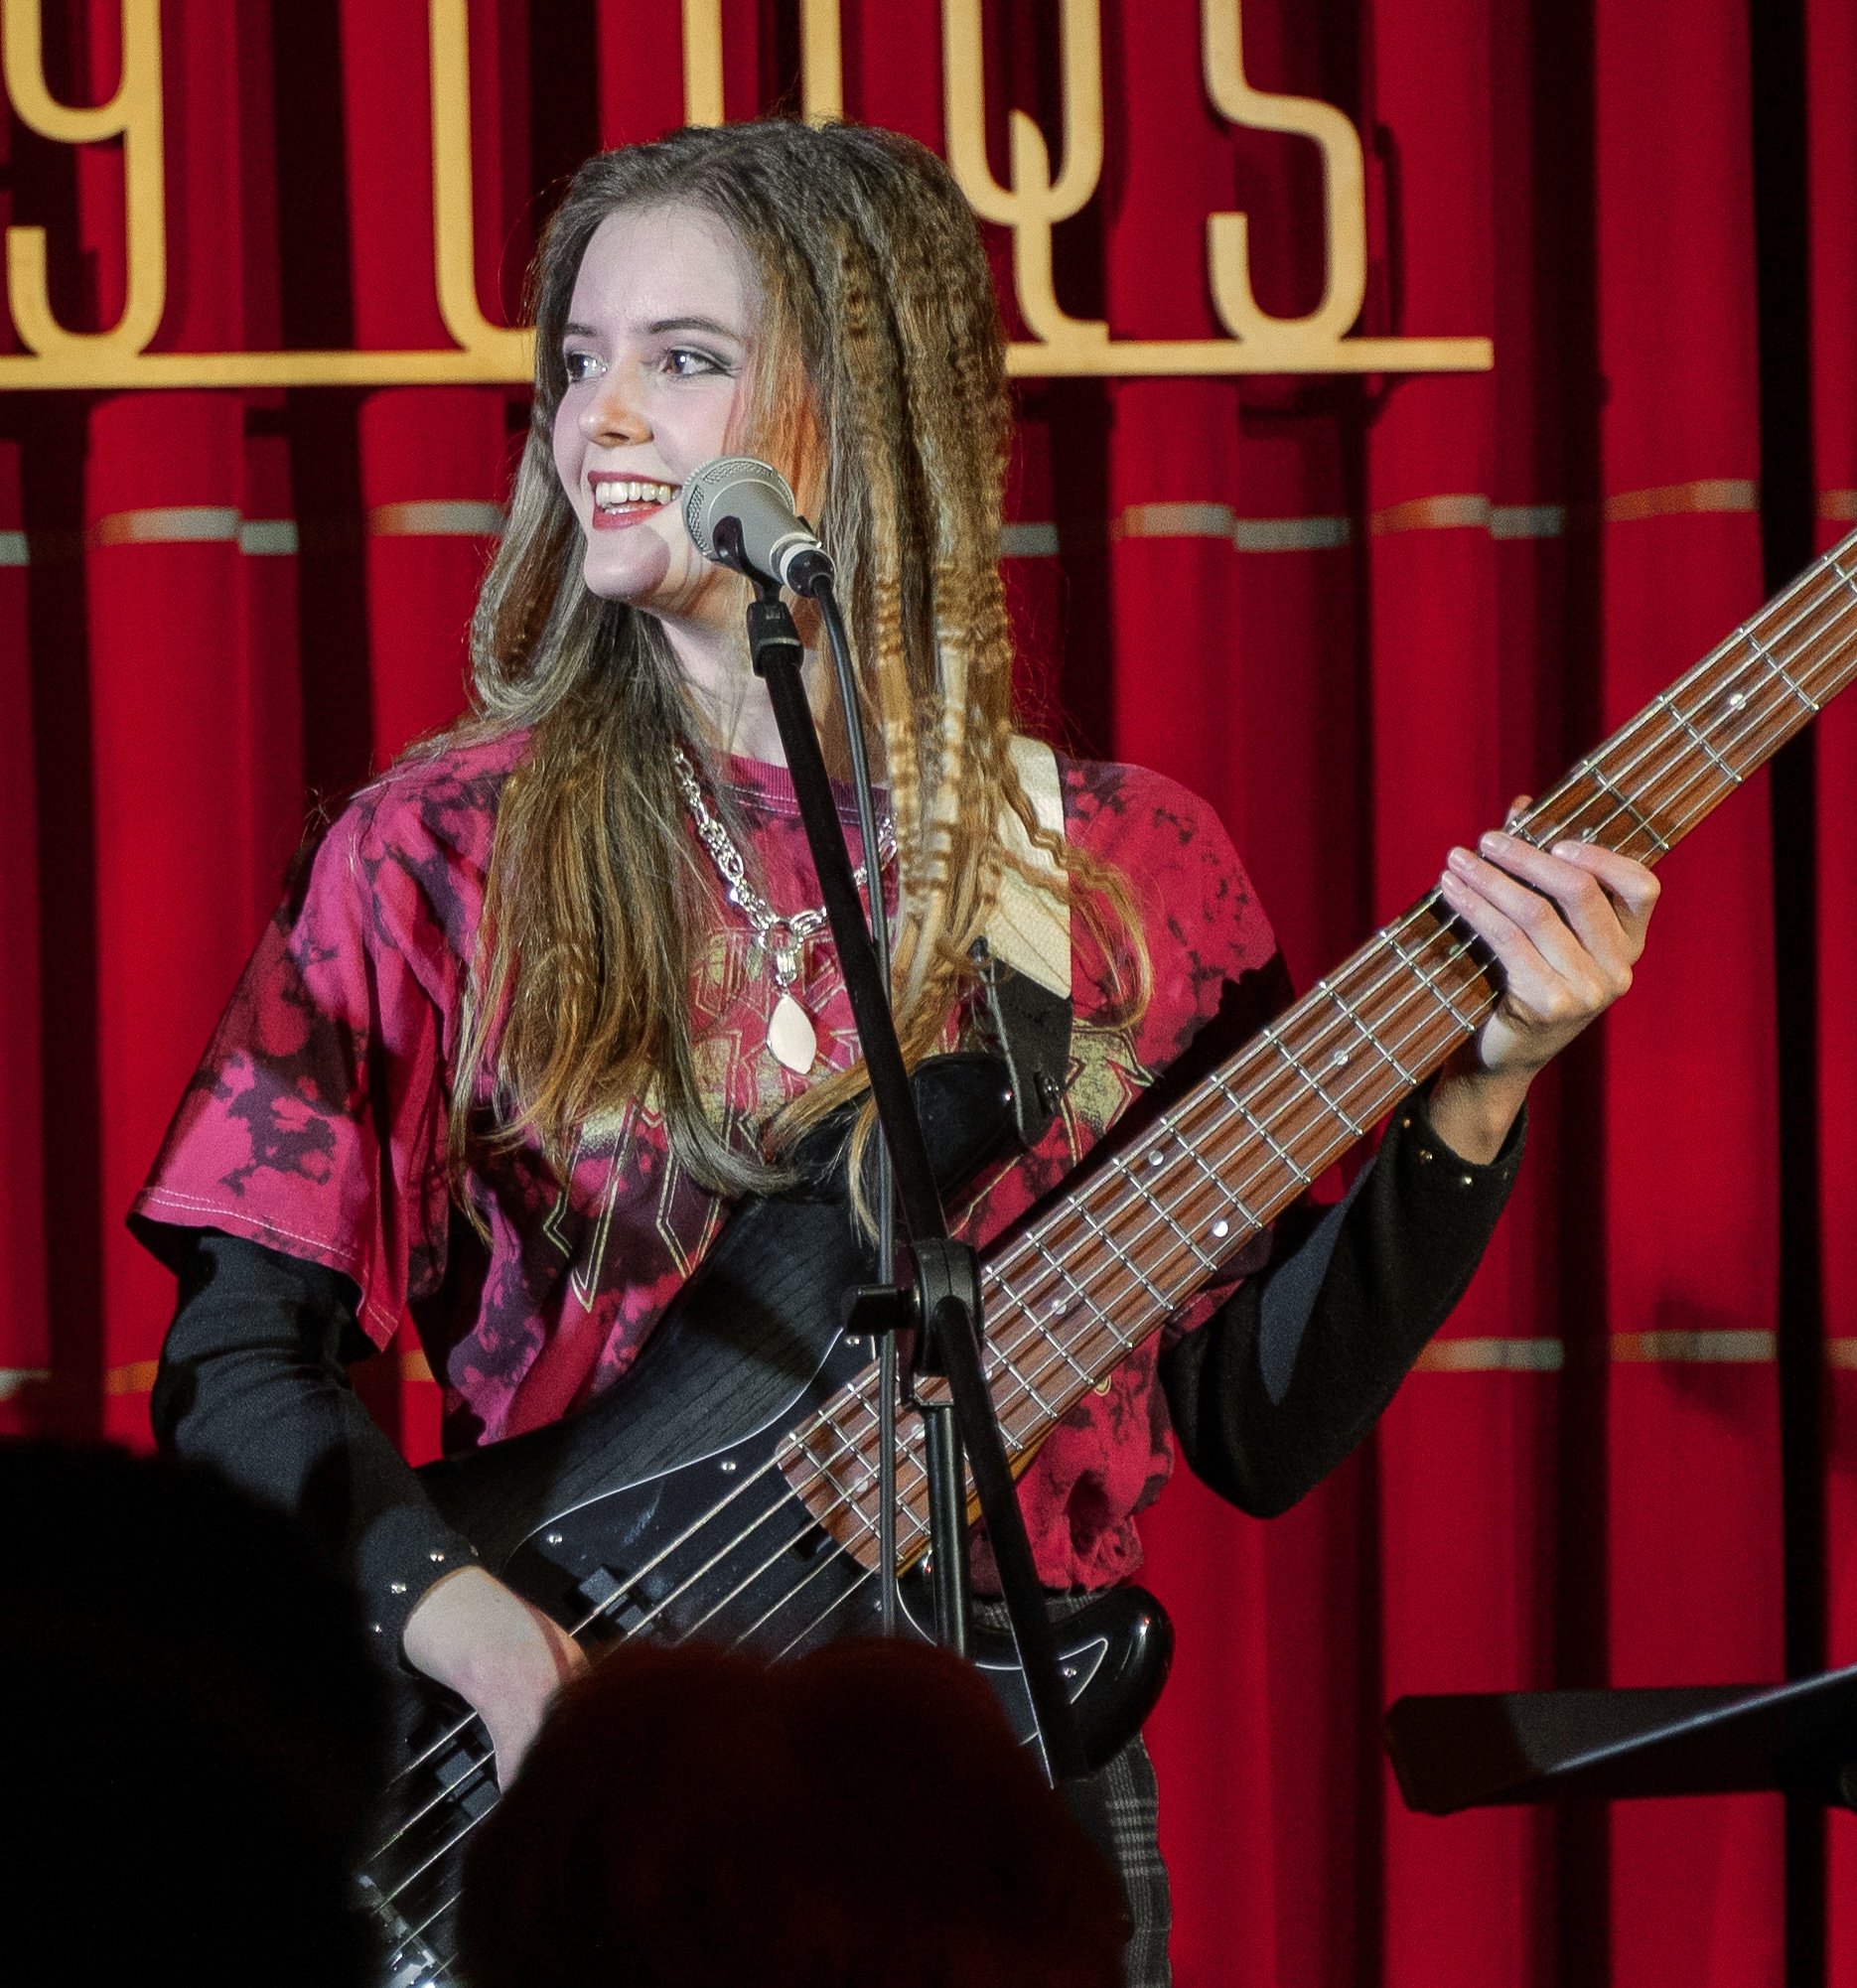 Eleanor grant onstage playing an Overwater Bass Guitar